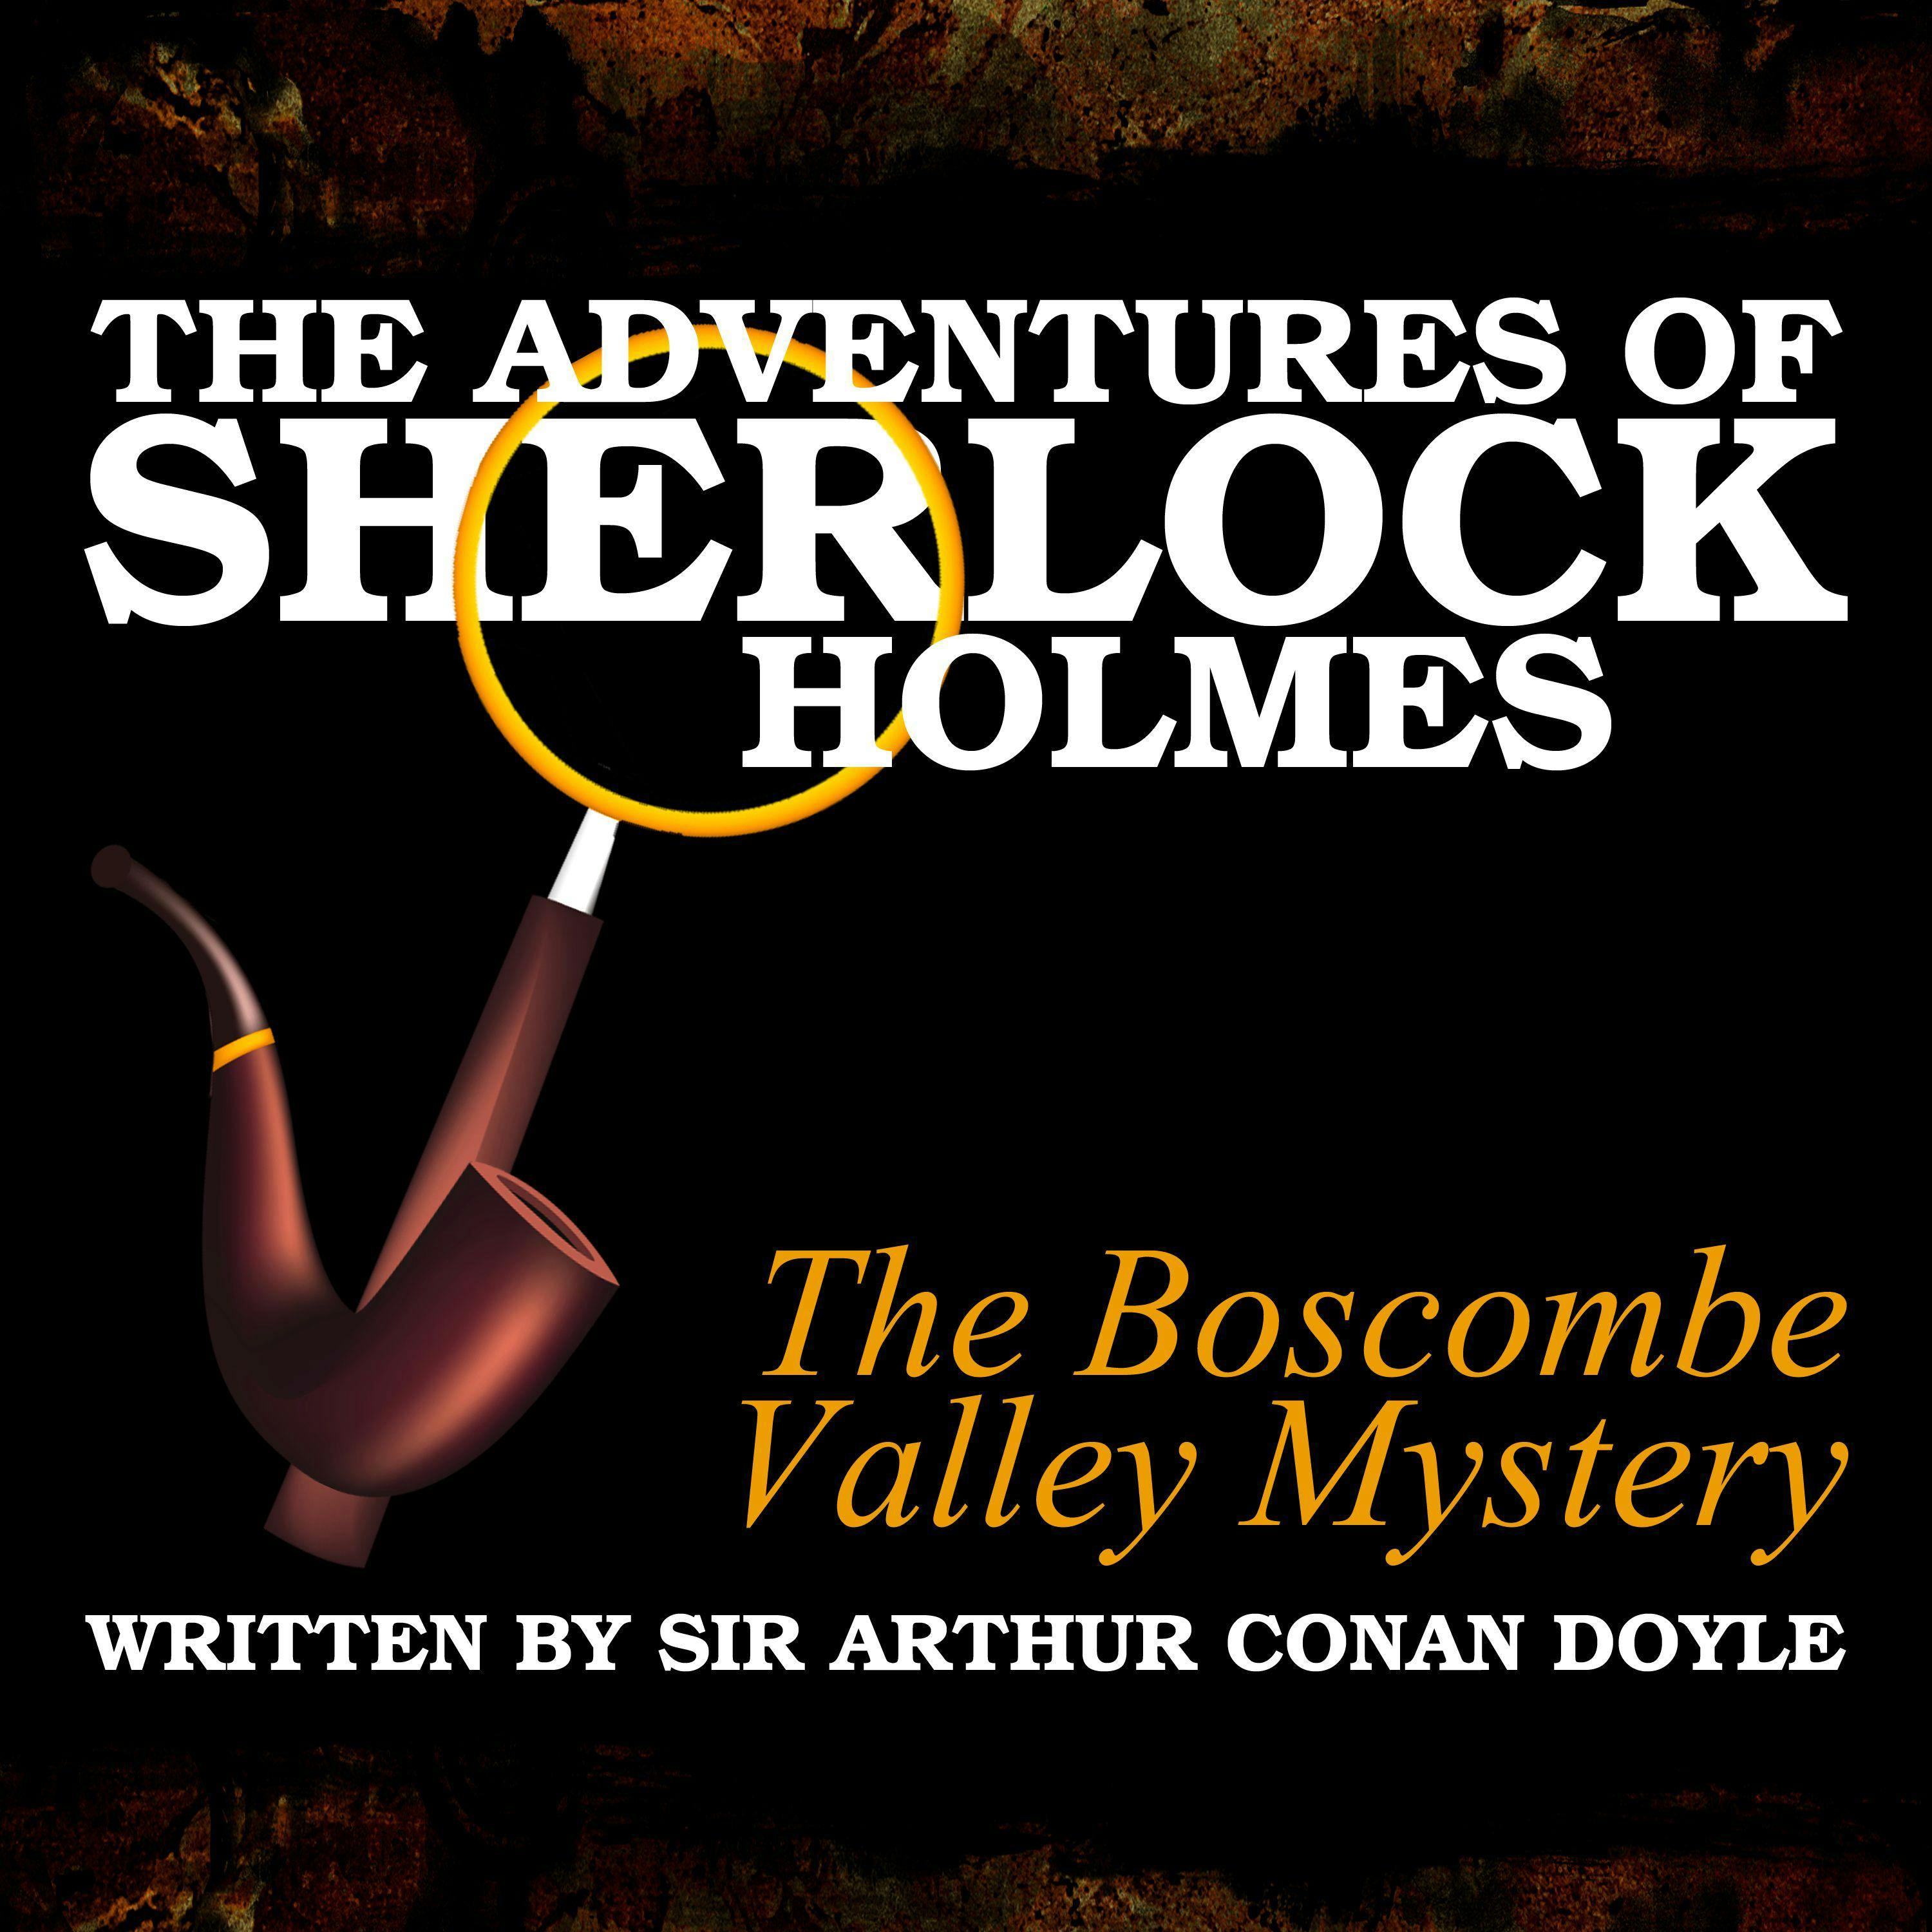 The Adventures of Sherlock Holmes: The Boscombe Valley Mystery - undefined